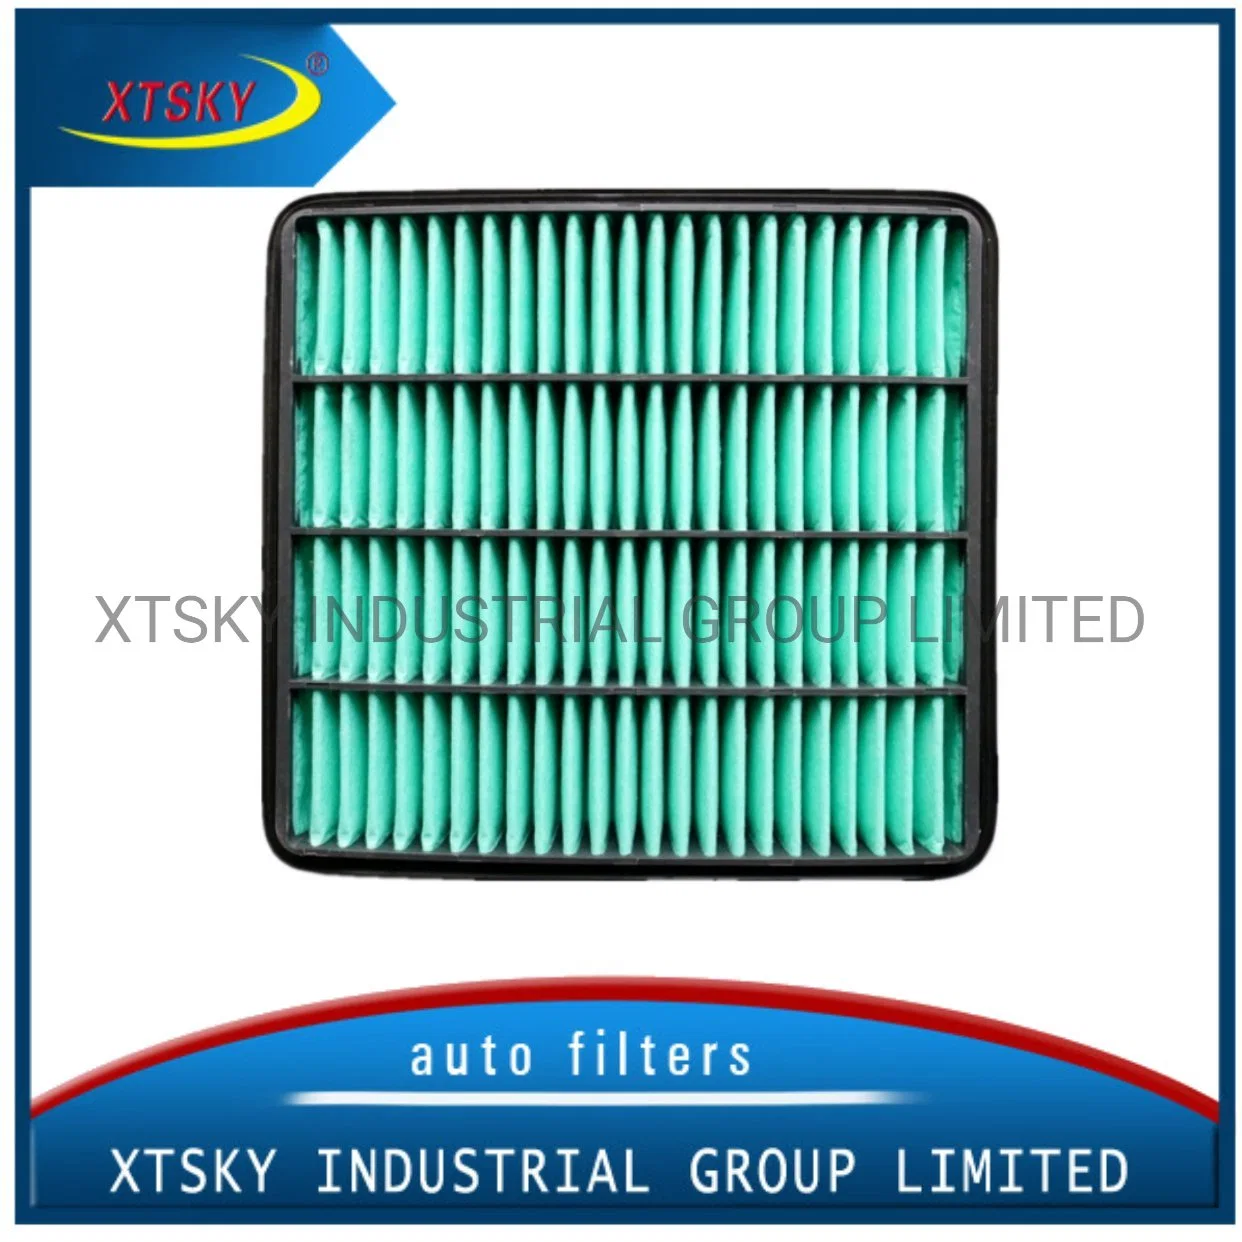 Genuine Auto Parts Engine Parts Air Filter 13780-65j00 62L00 81A00 57b00 Used for Auto Cars